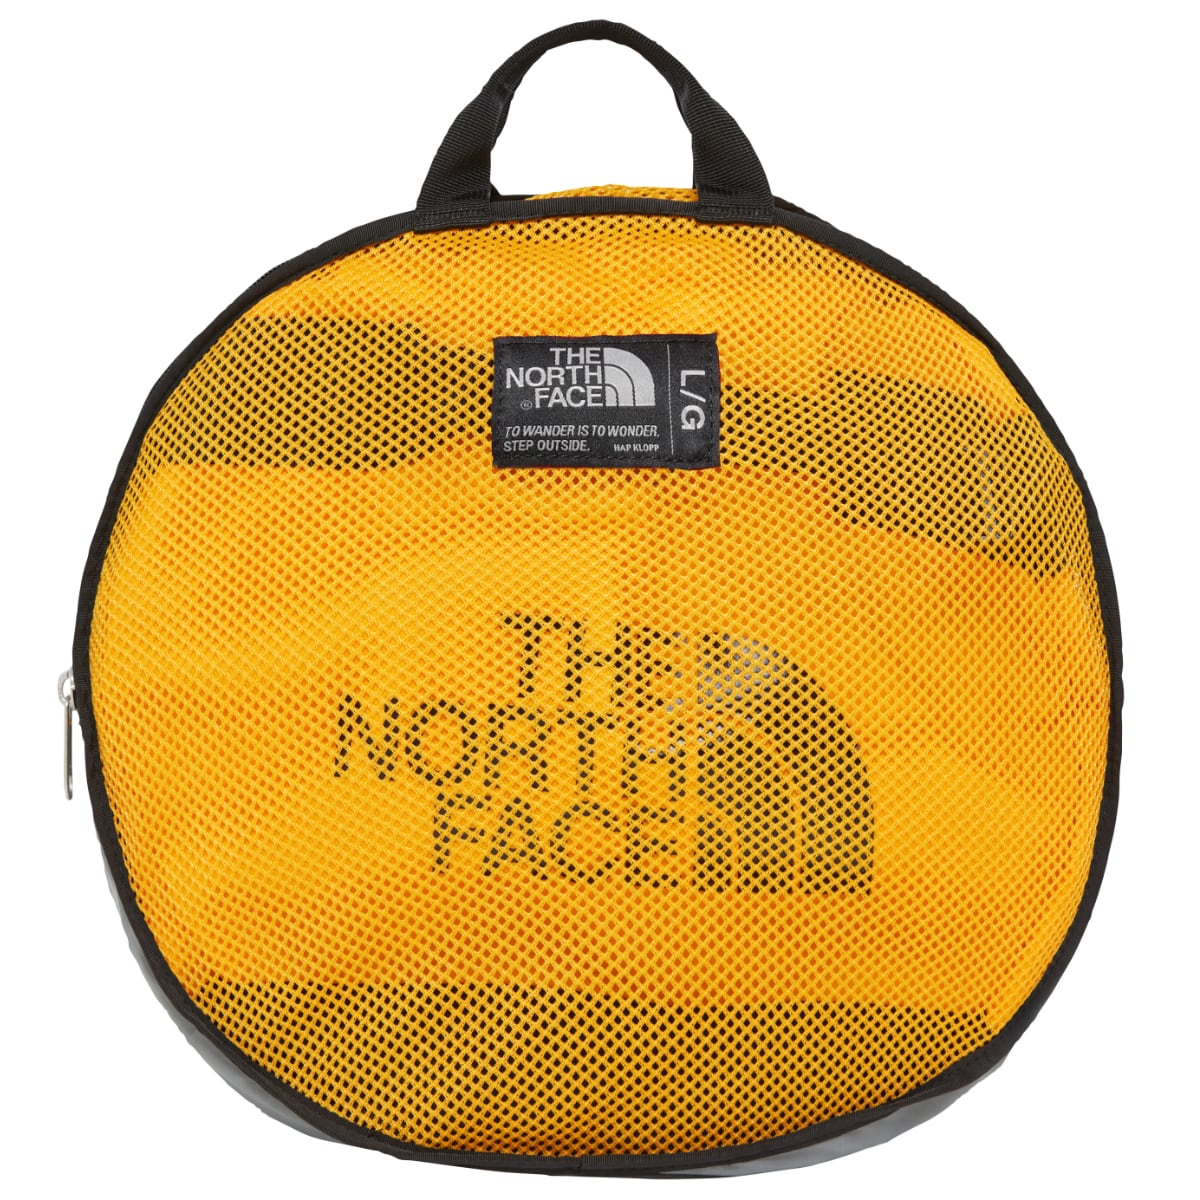 The North Face Base Camp Duffel Large | Summit Gold